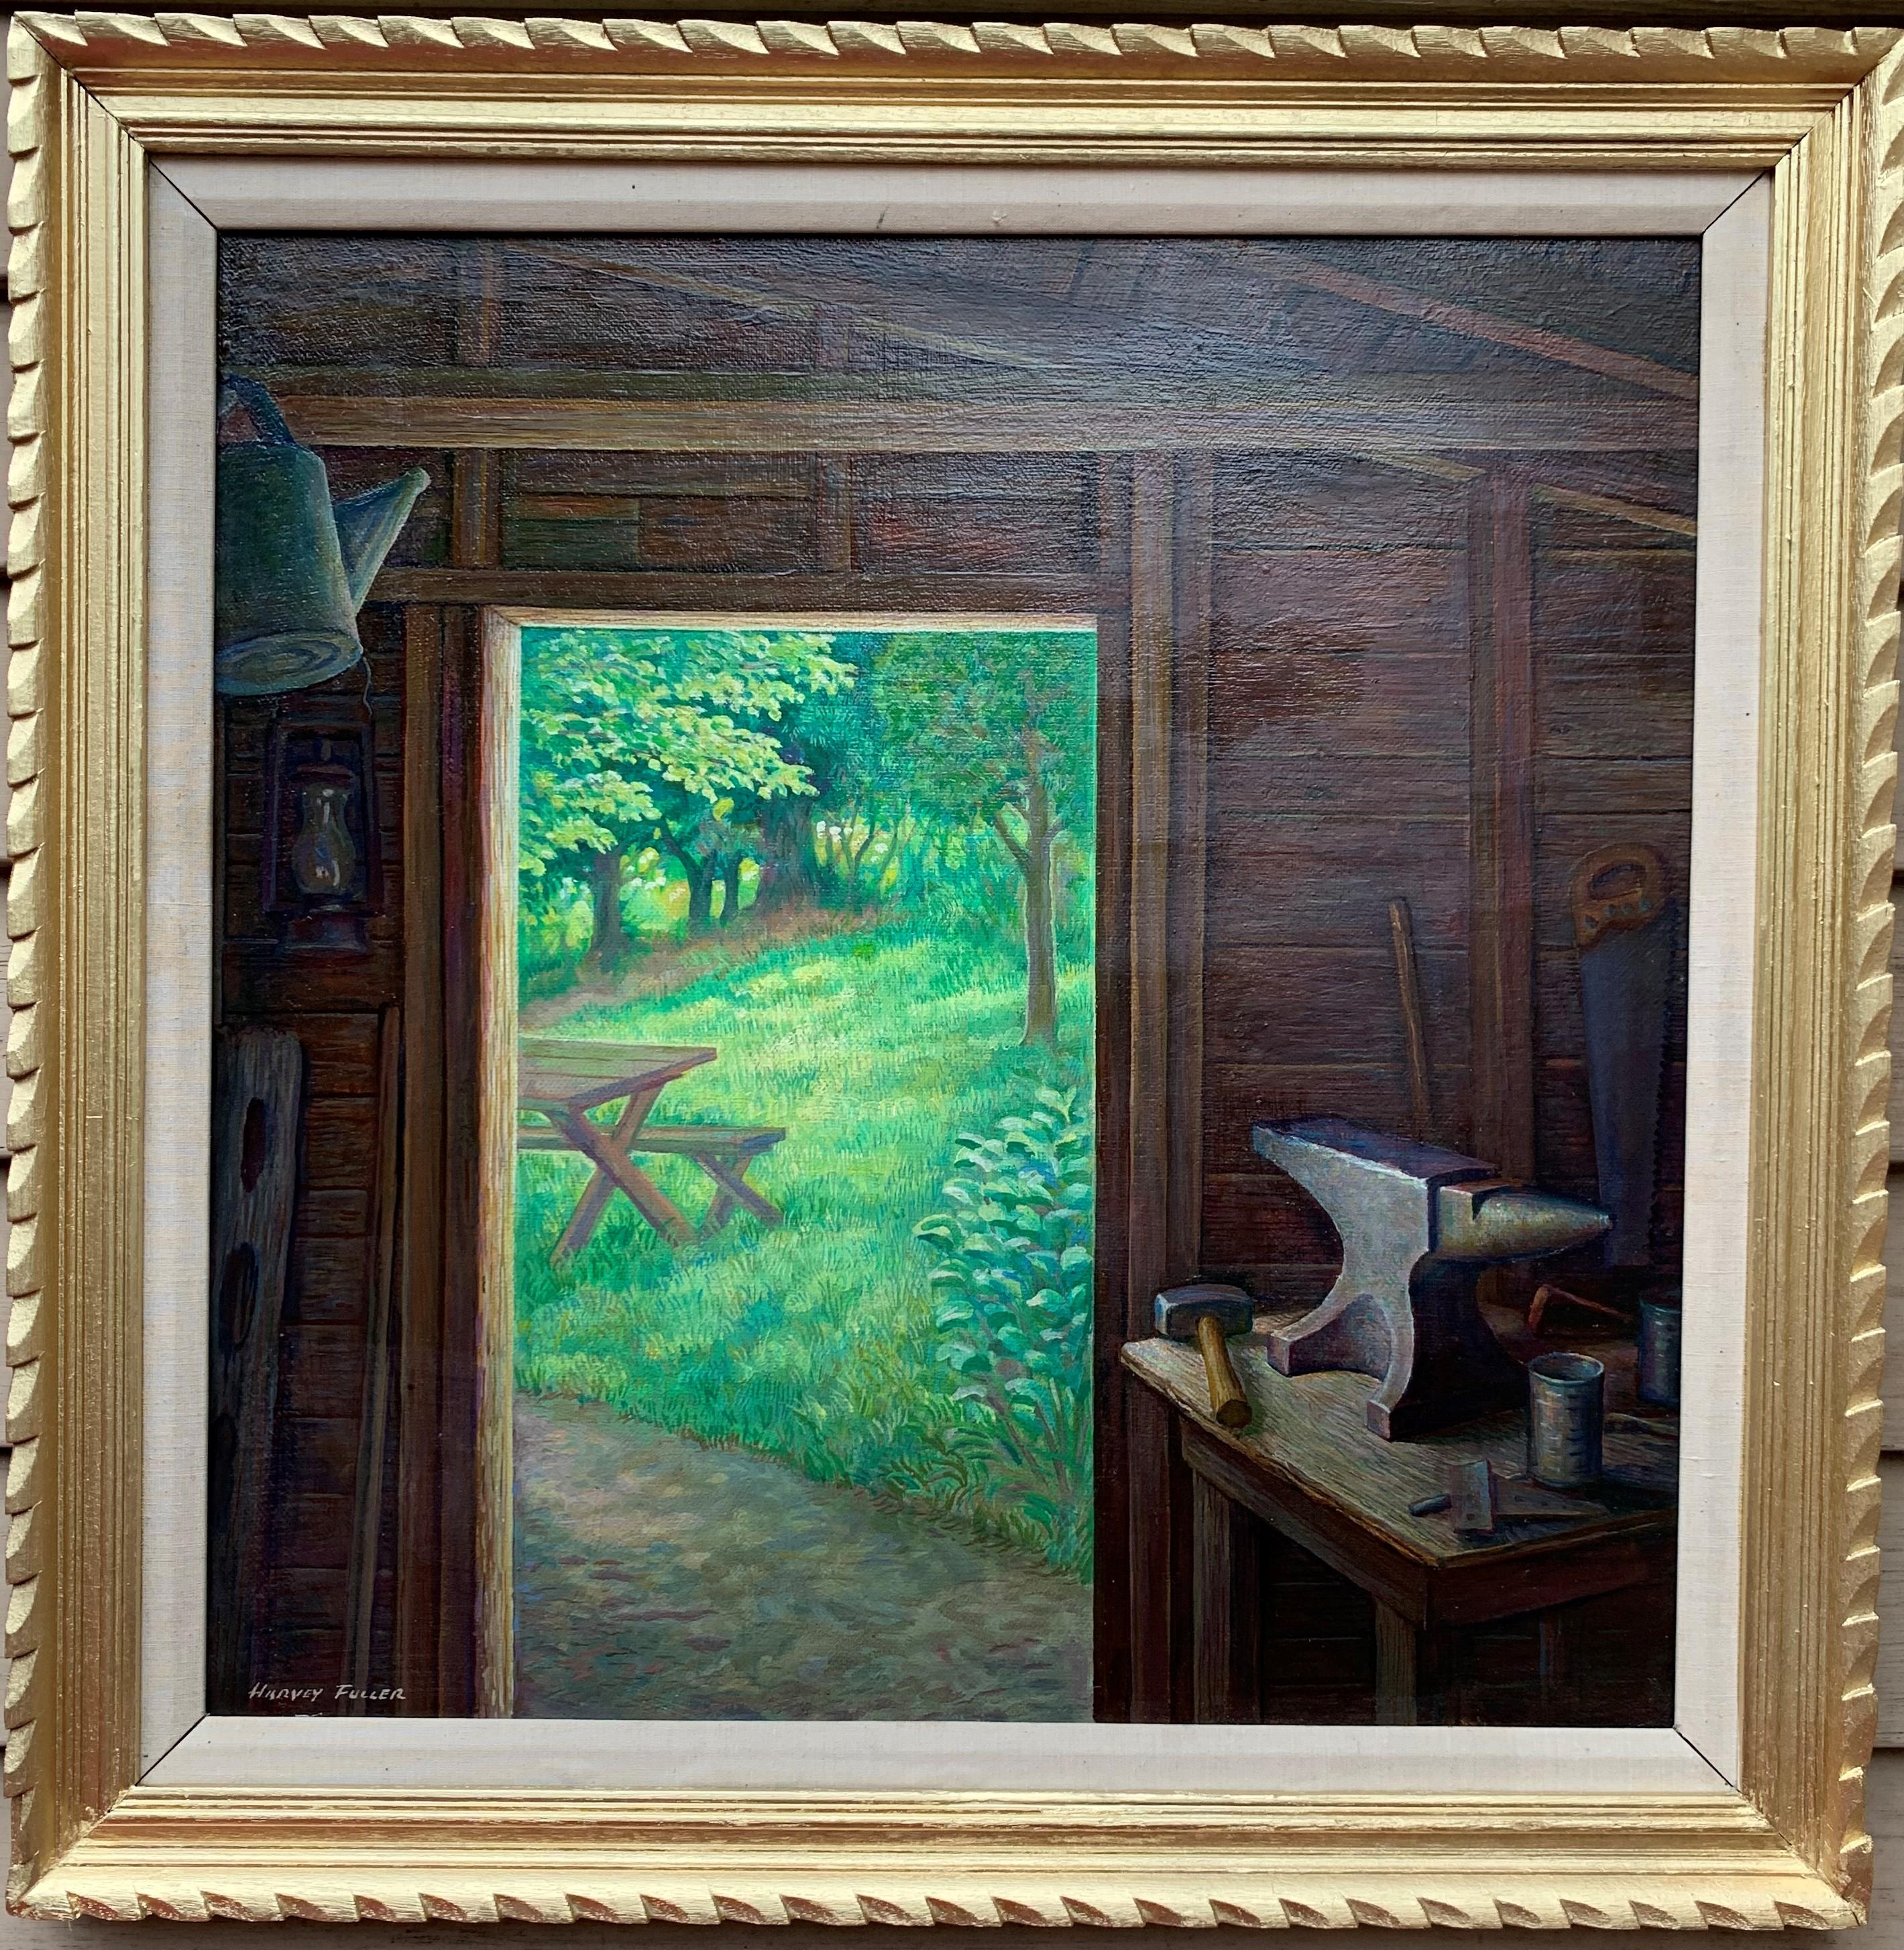 Up for sale is a beautiful oil painting on masonite by HARVEY K. FULLER (AMERICAN, 1918 - 2017) depicting a garden view from the open door of the carpentry workshop. 

Signed in the lower right corner.

Dimensions: (Frame) 27" x 26.5", (Canvas) 22"